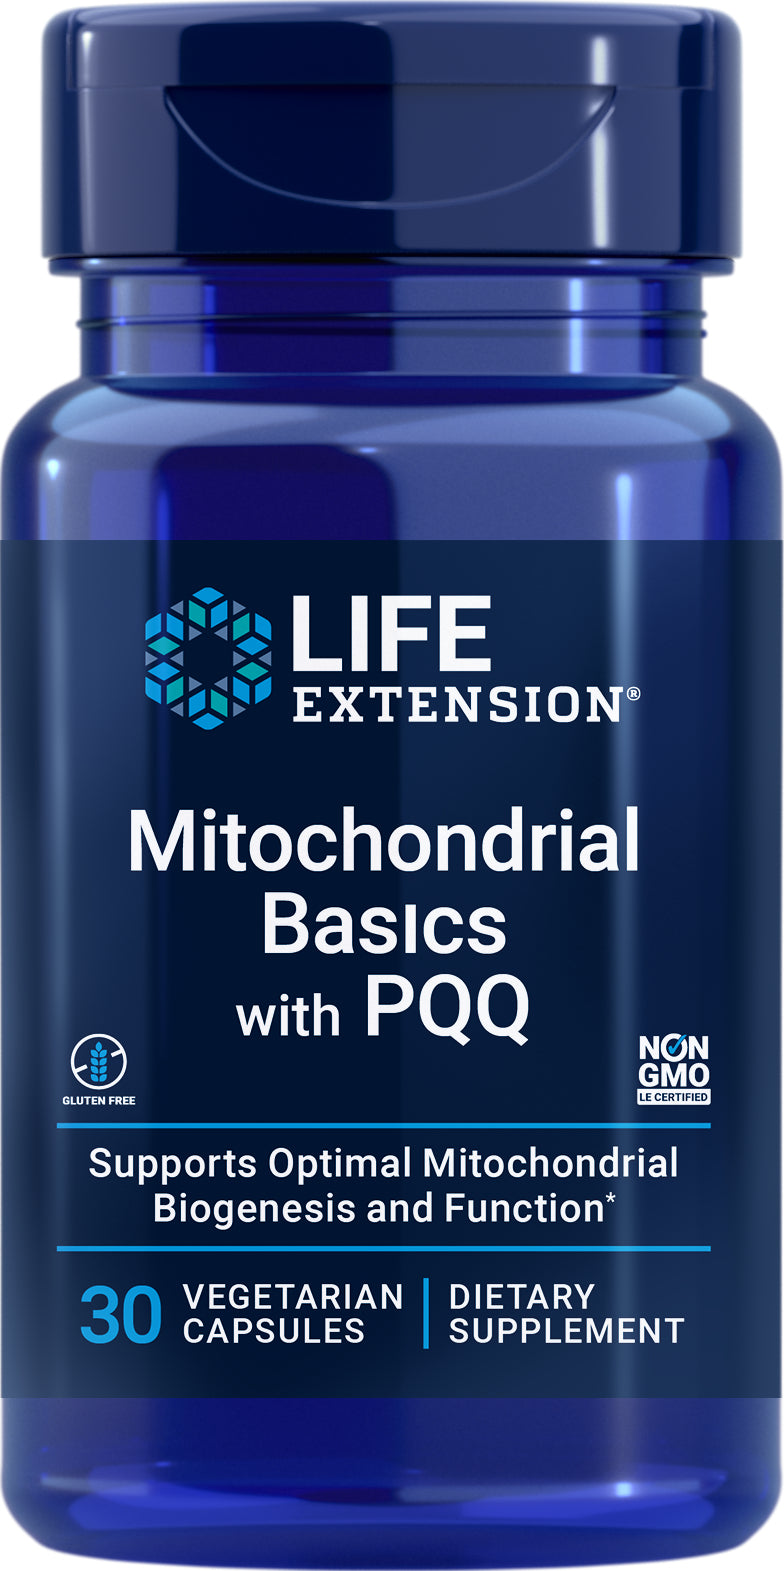 Mitochondrial Basics with PQQ 30 veg caps by Life Extension